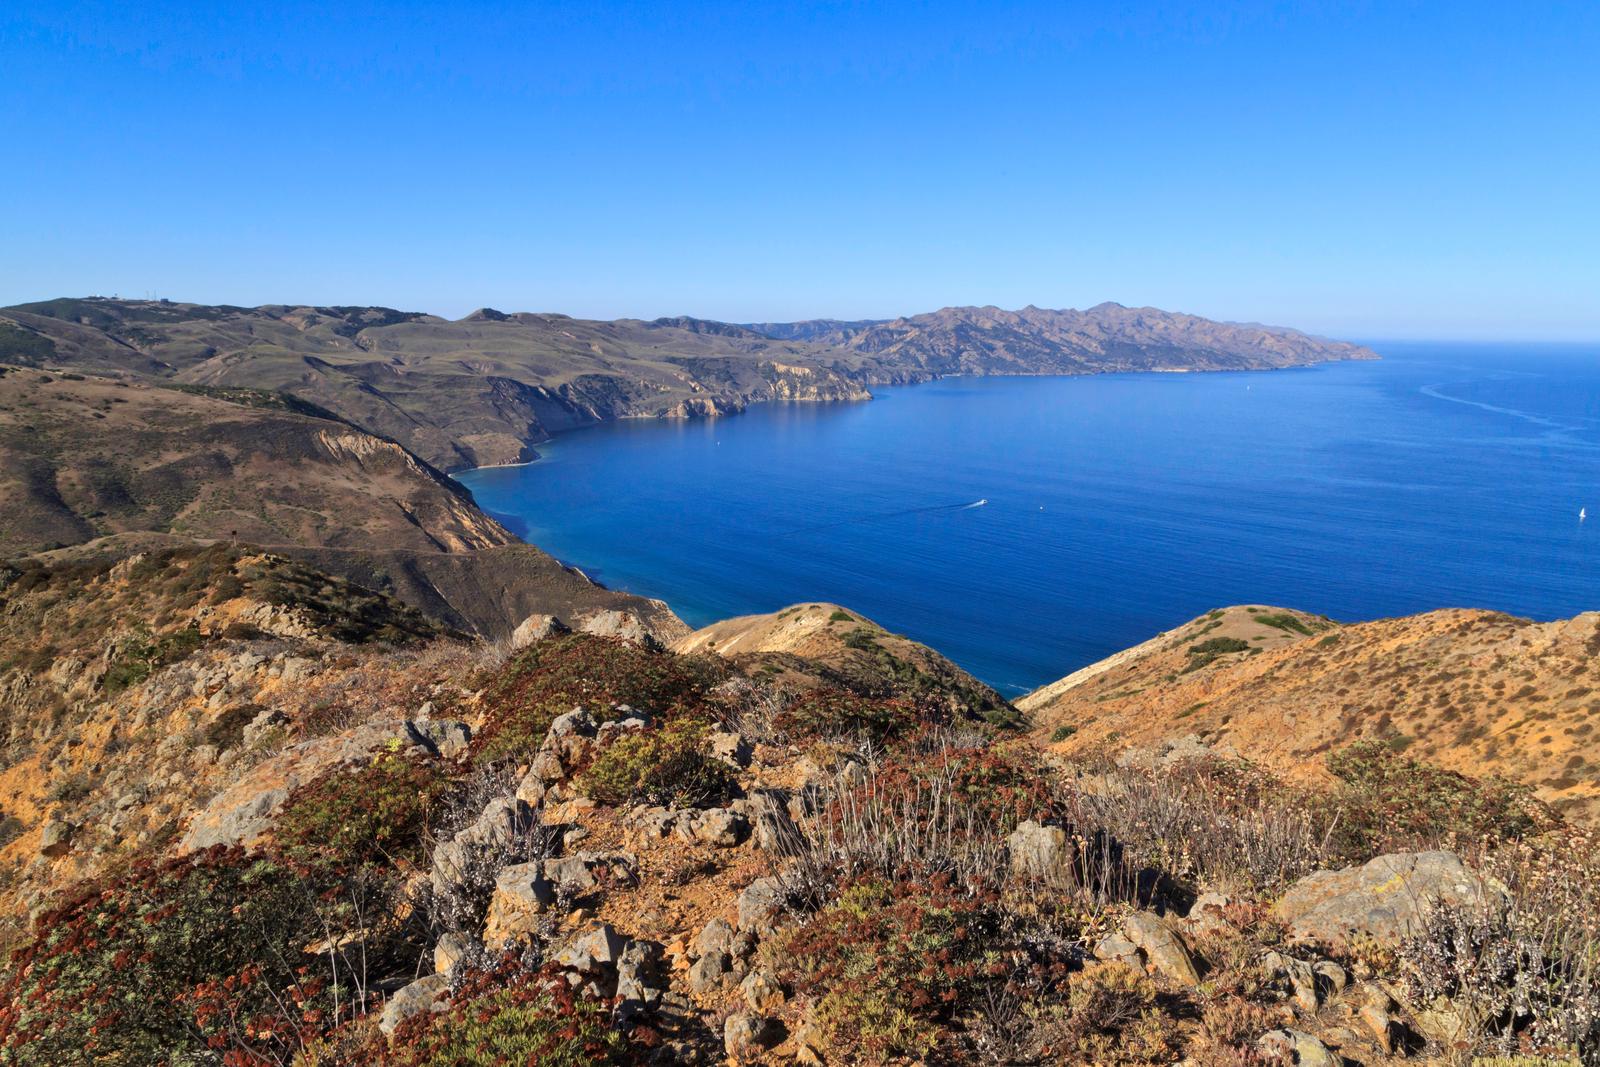 View from a high ridge overlooking the rest of a long, narrow, rugged island with steep cliffs  Chinese Harbor, Santa Cruz Island